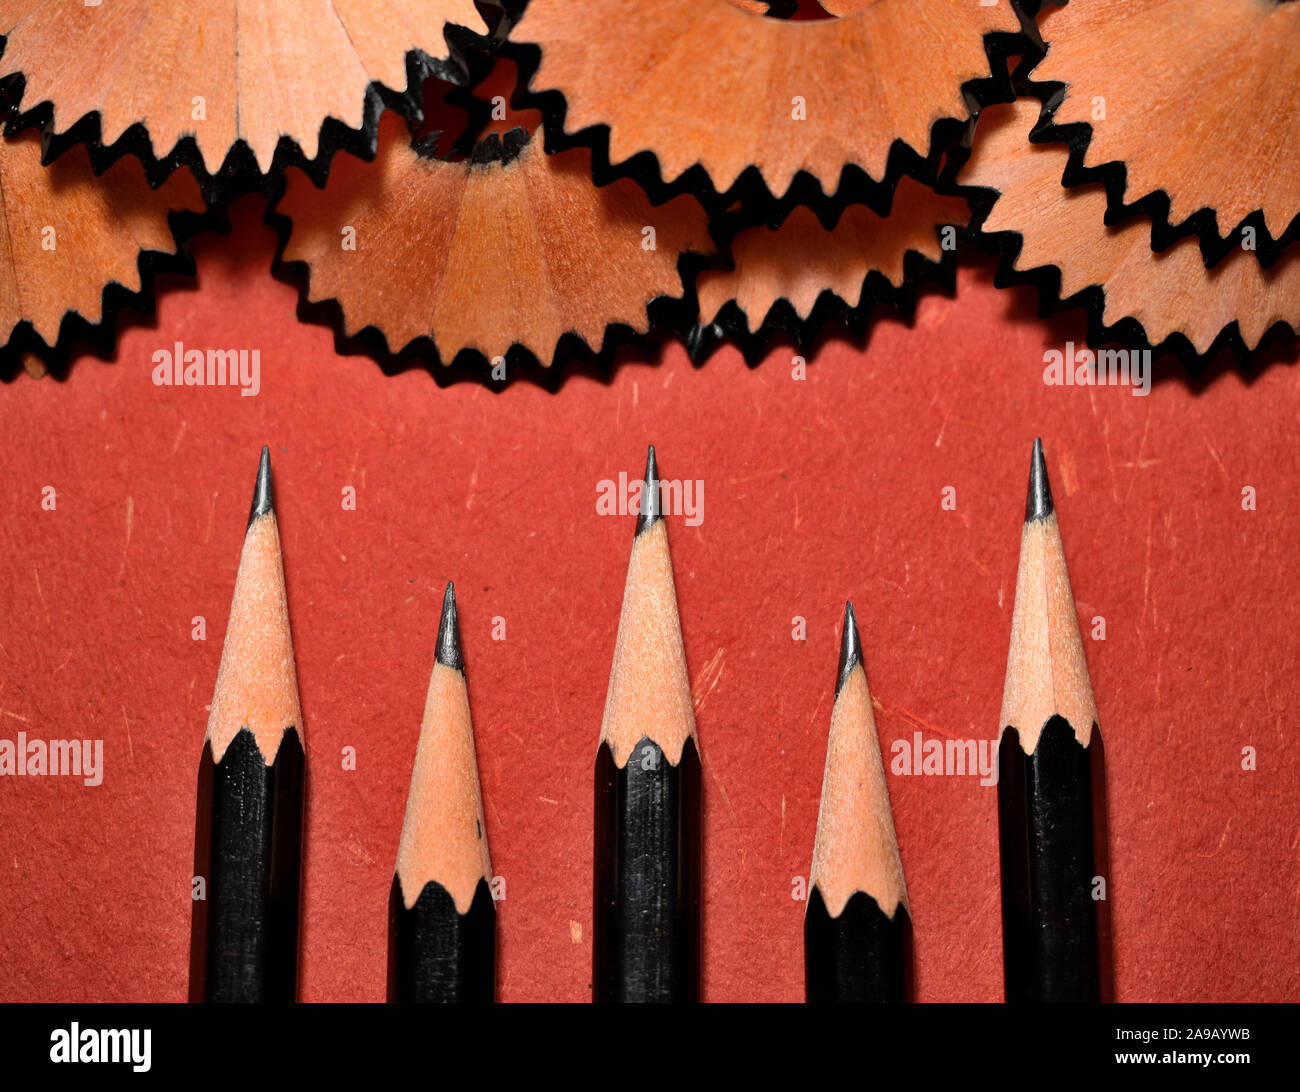 Black lead pencils and their shavings on red background. Stock Photo